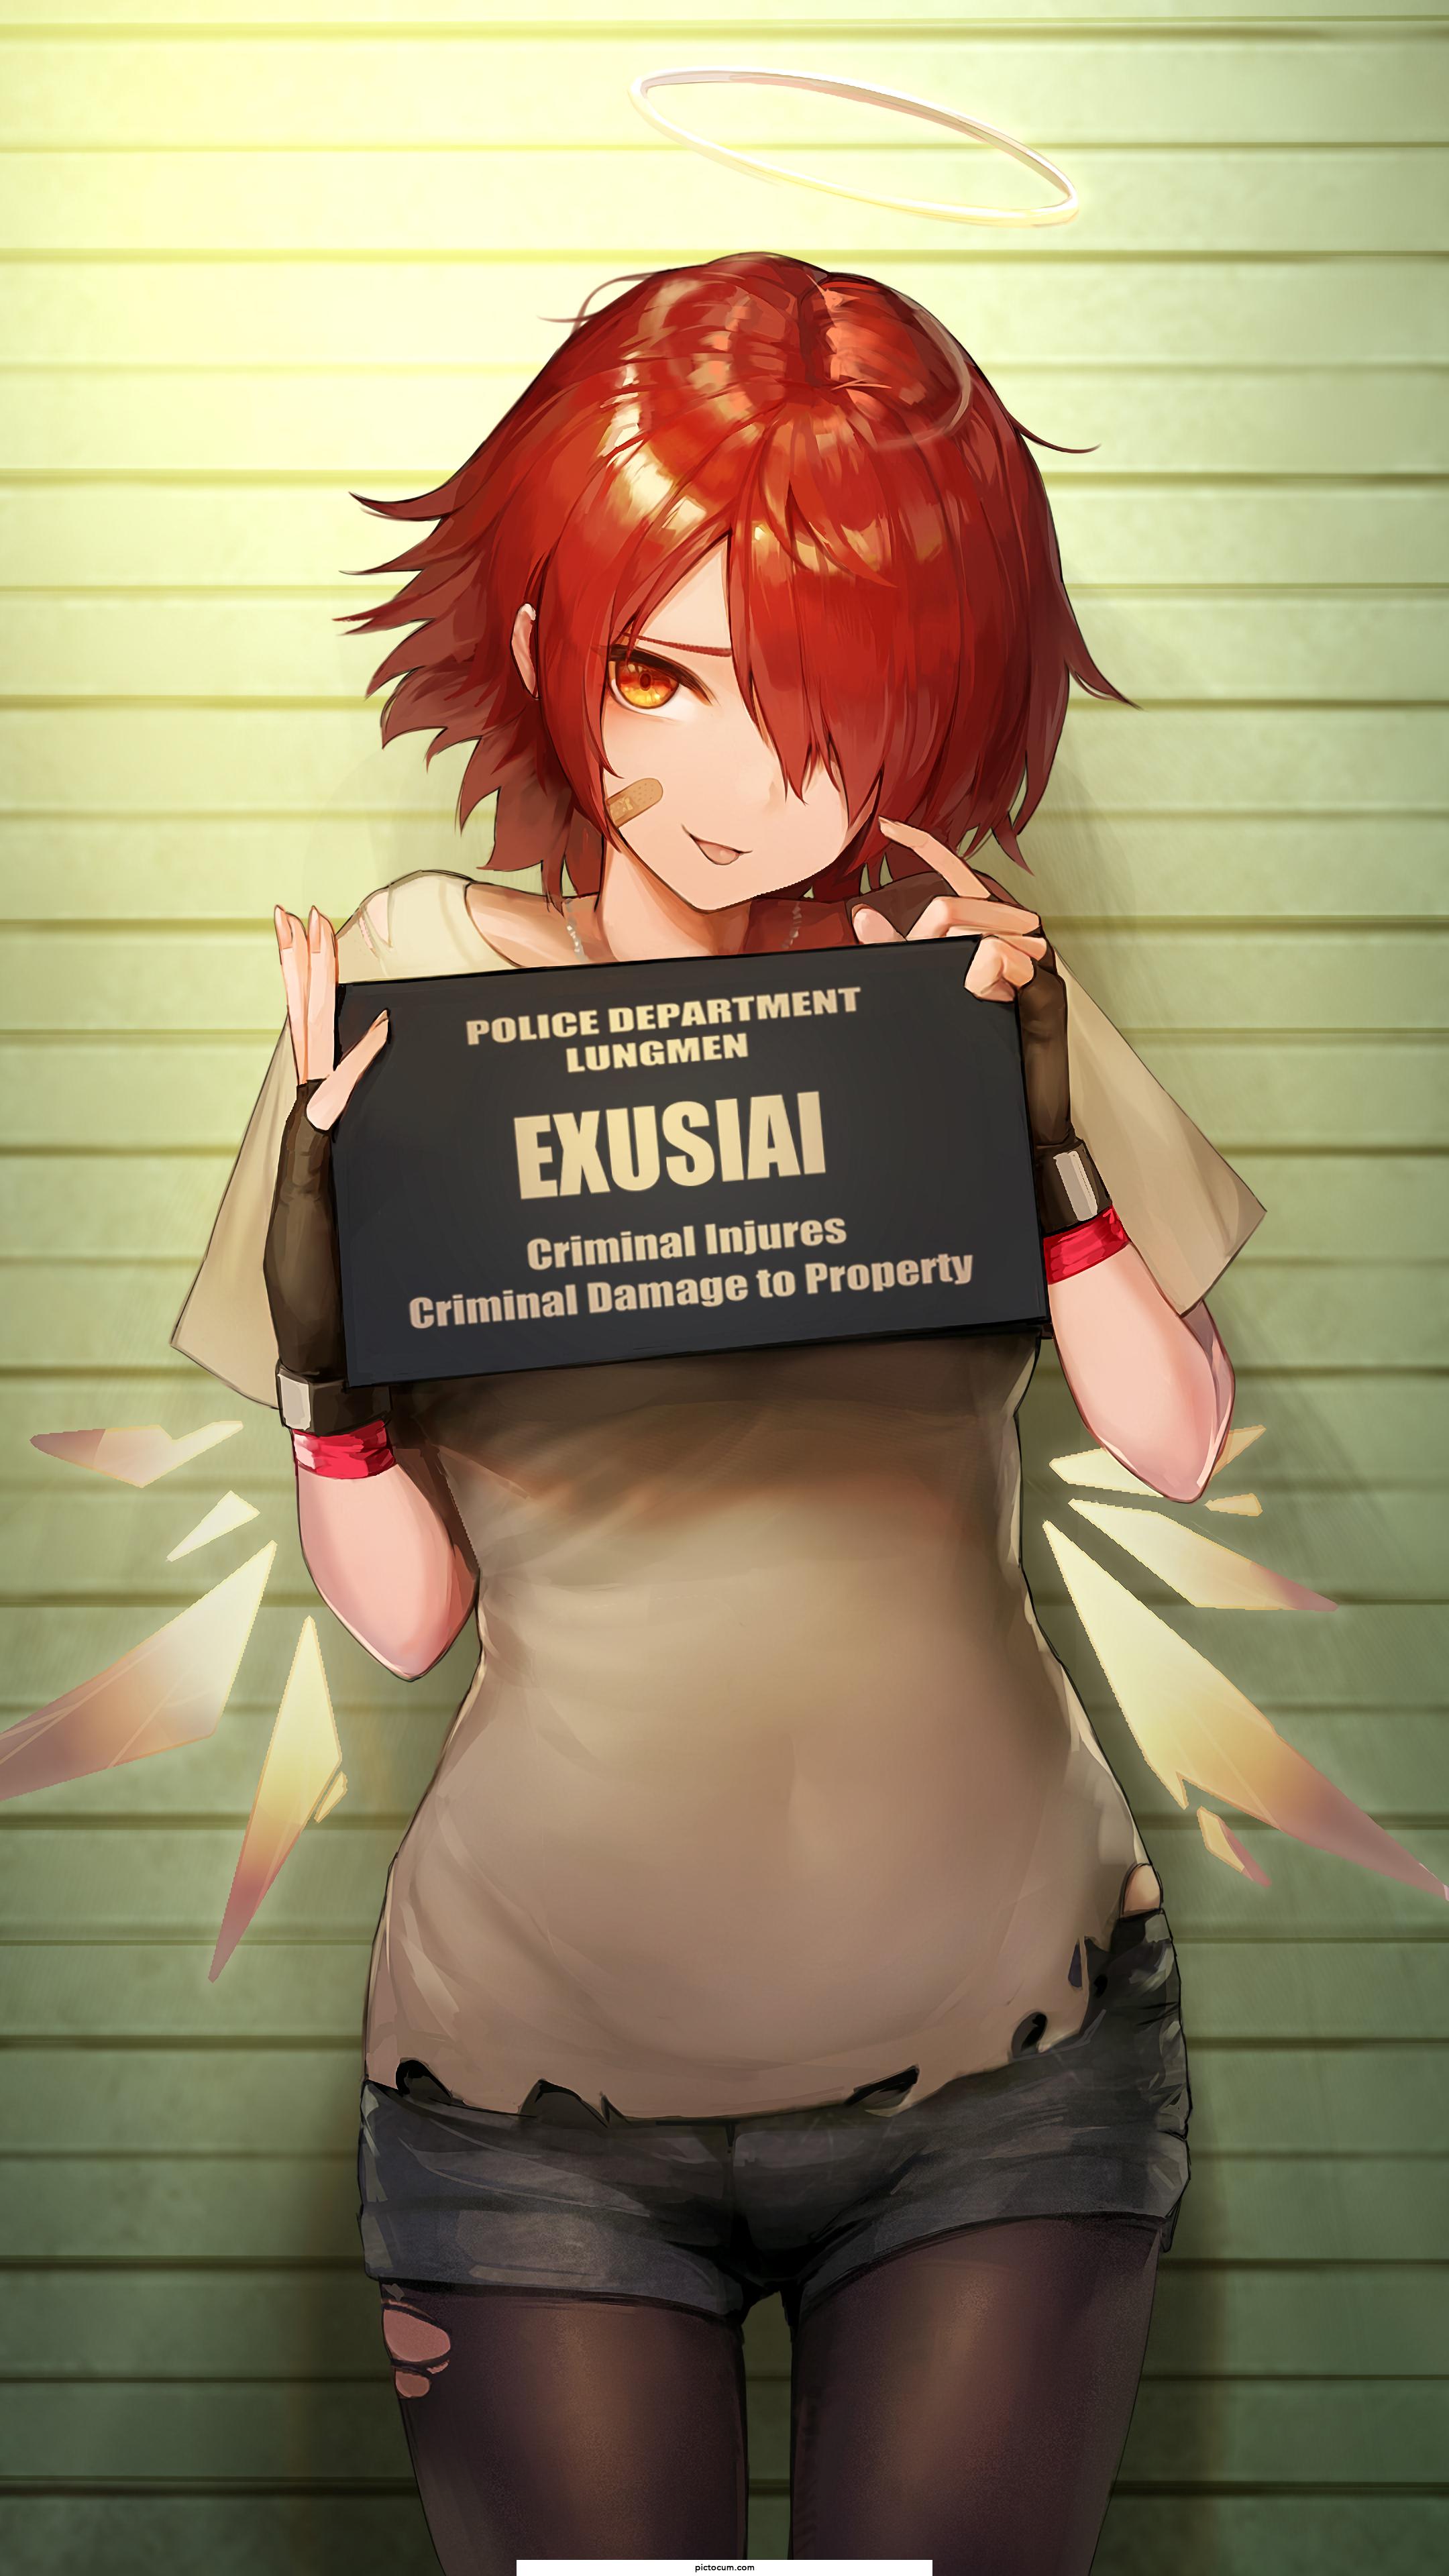 Exusiai Arrested Link to 4K version in the comments